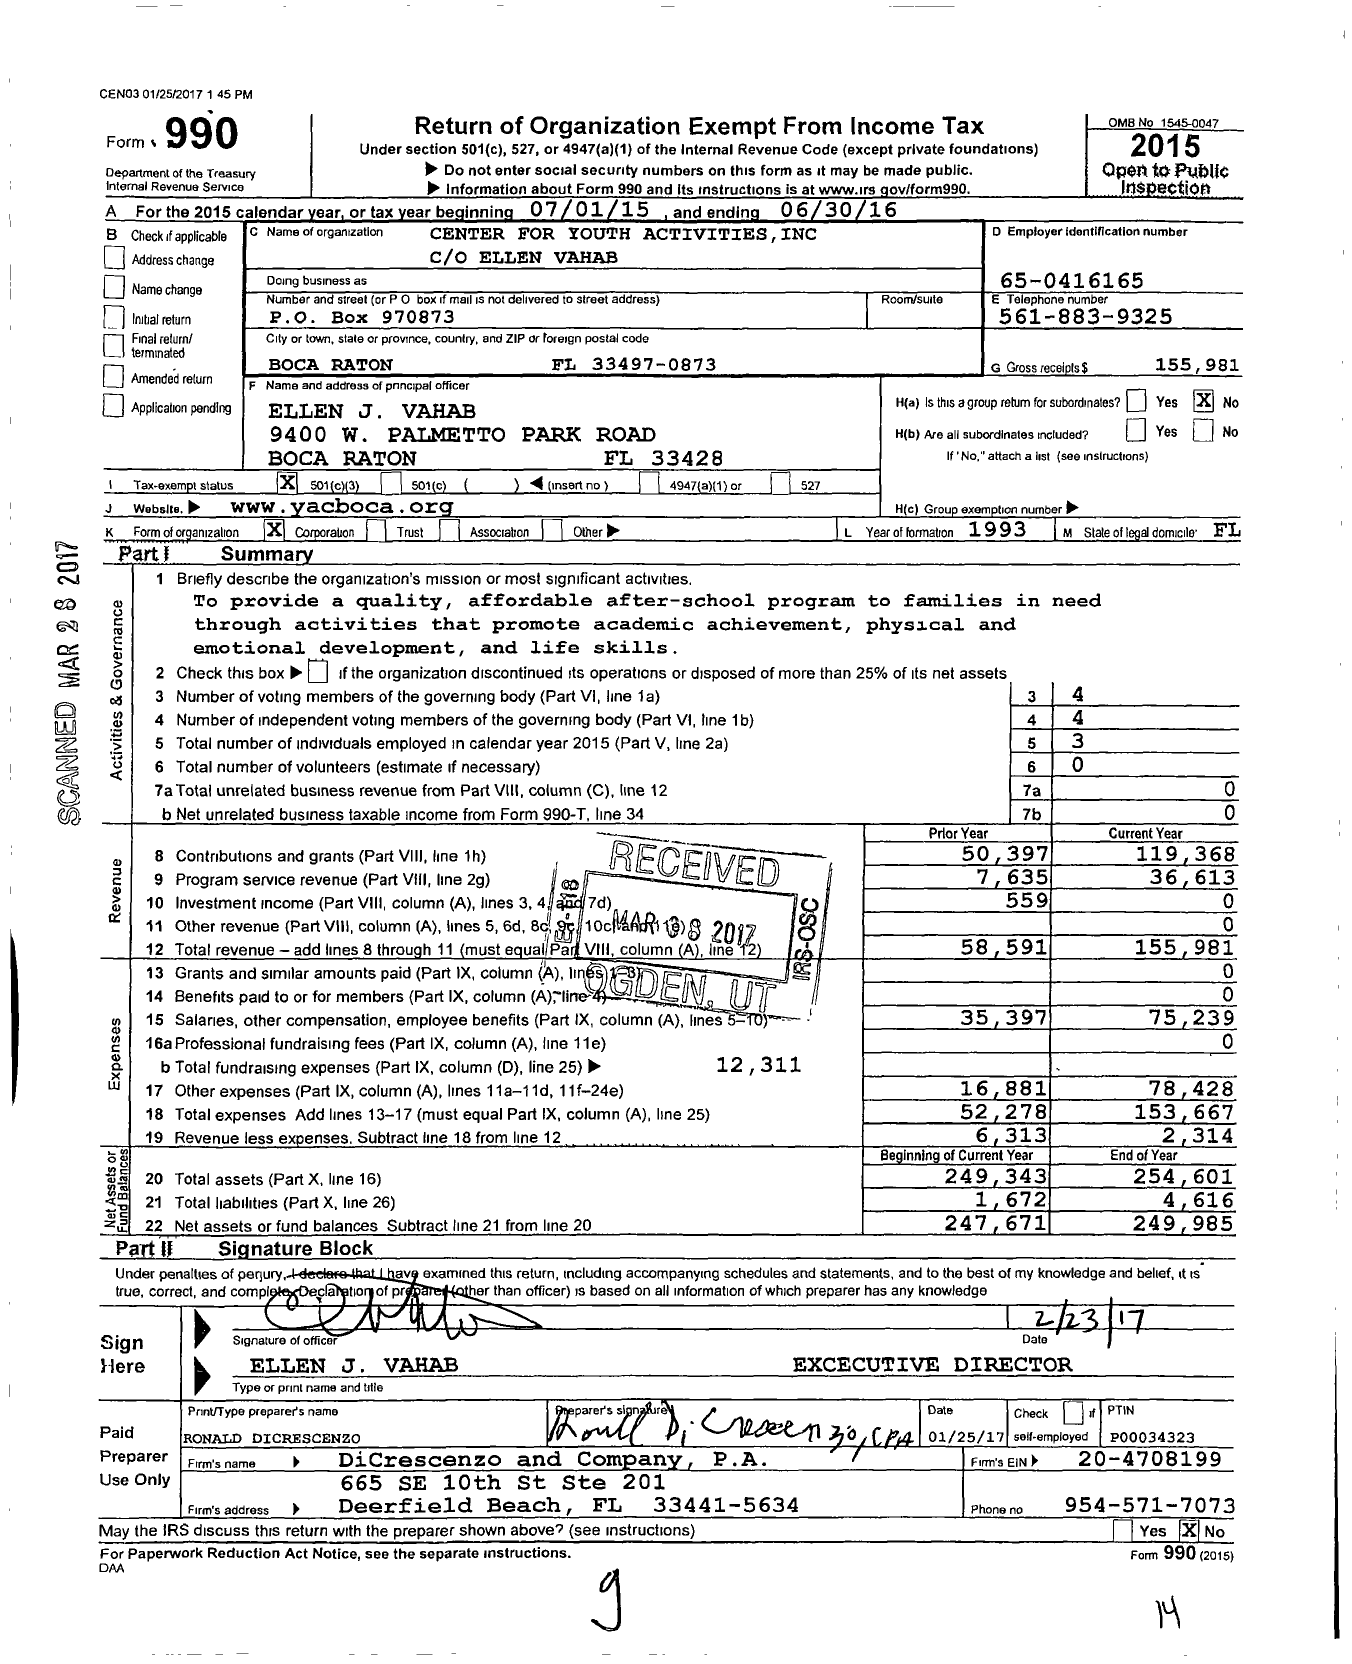 Image of first page of 2015 Form 990 for The Center for Youth Activities